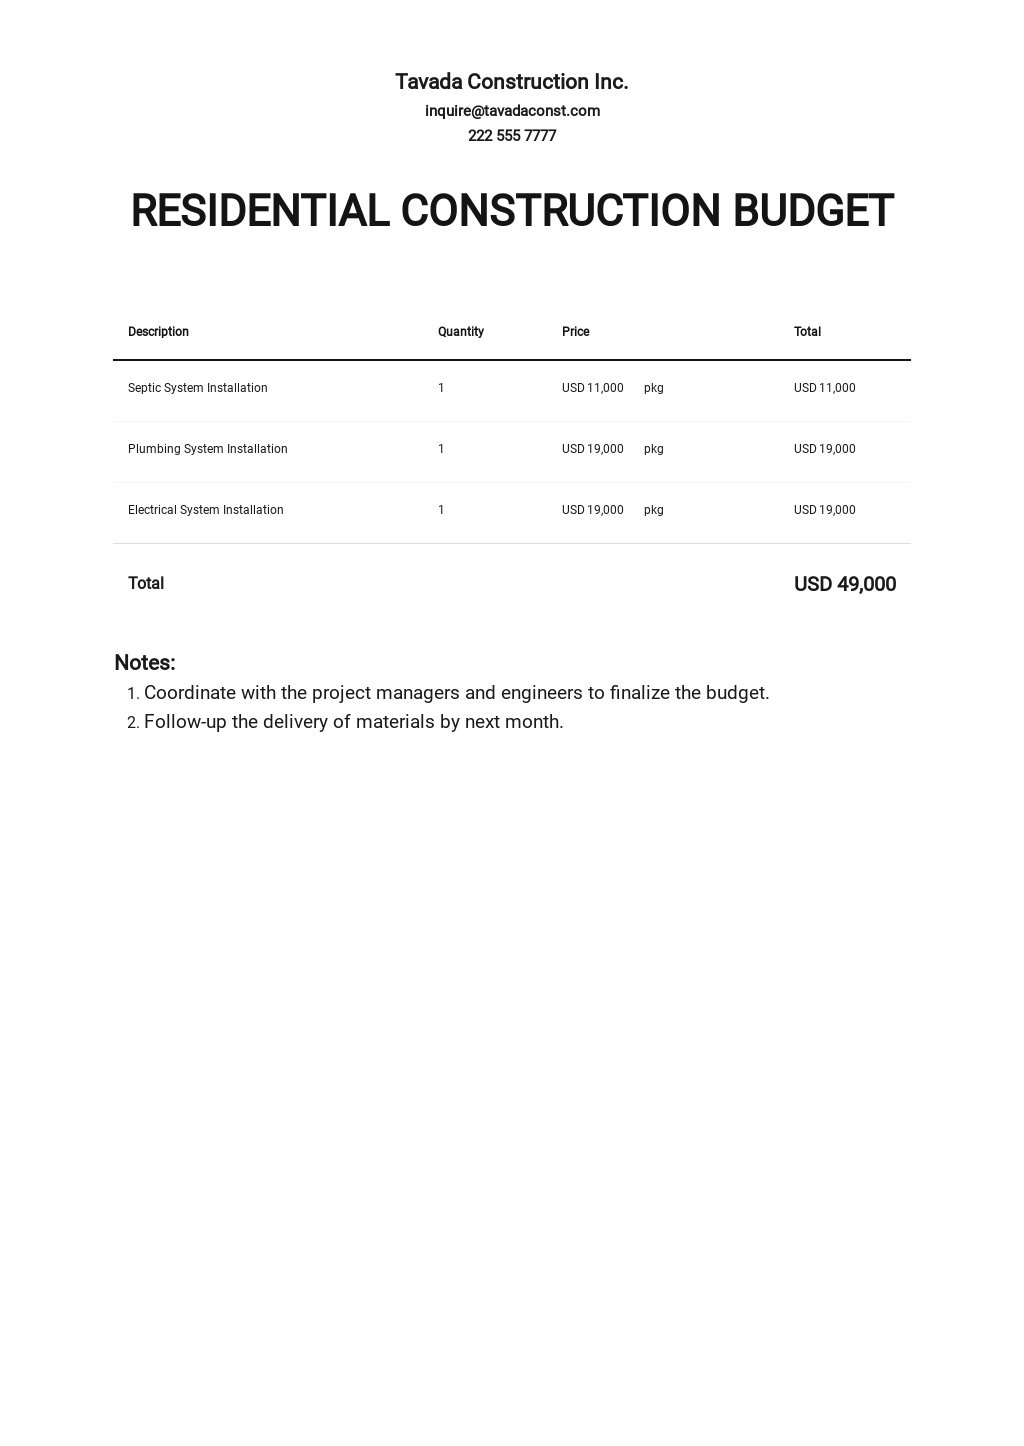 Residential Construction Budget Template.jpe